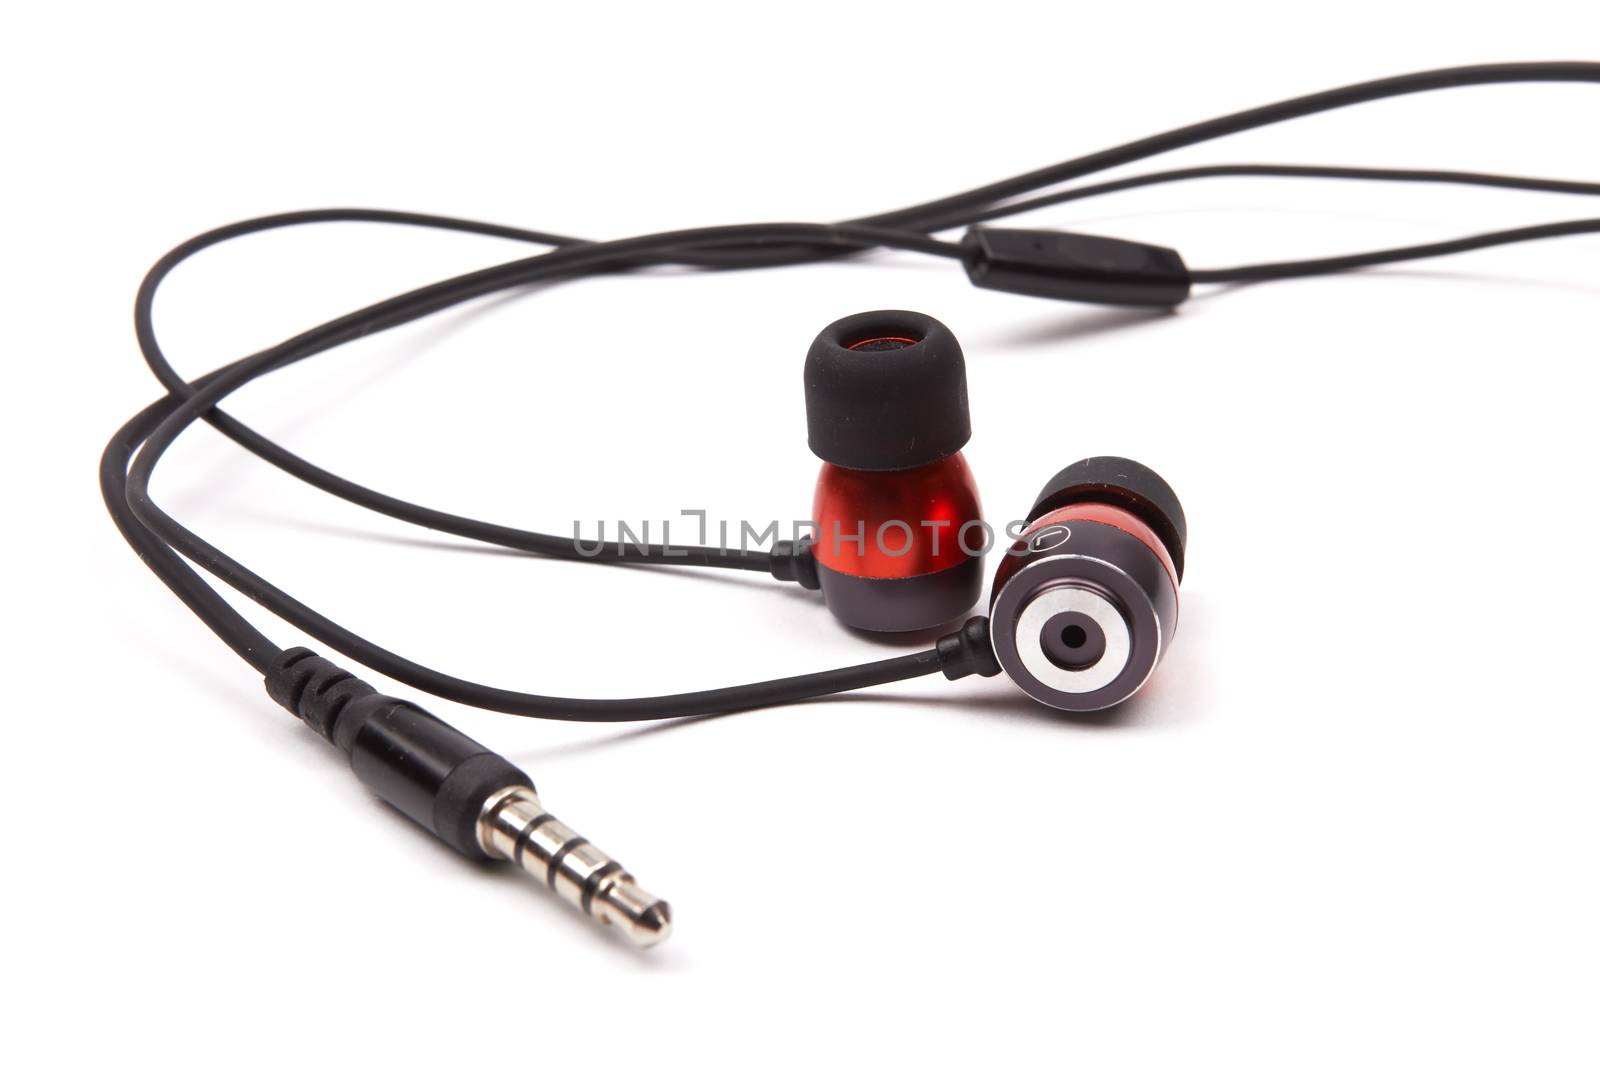 Modern portable audio earphones isolated on a white background 